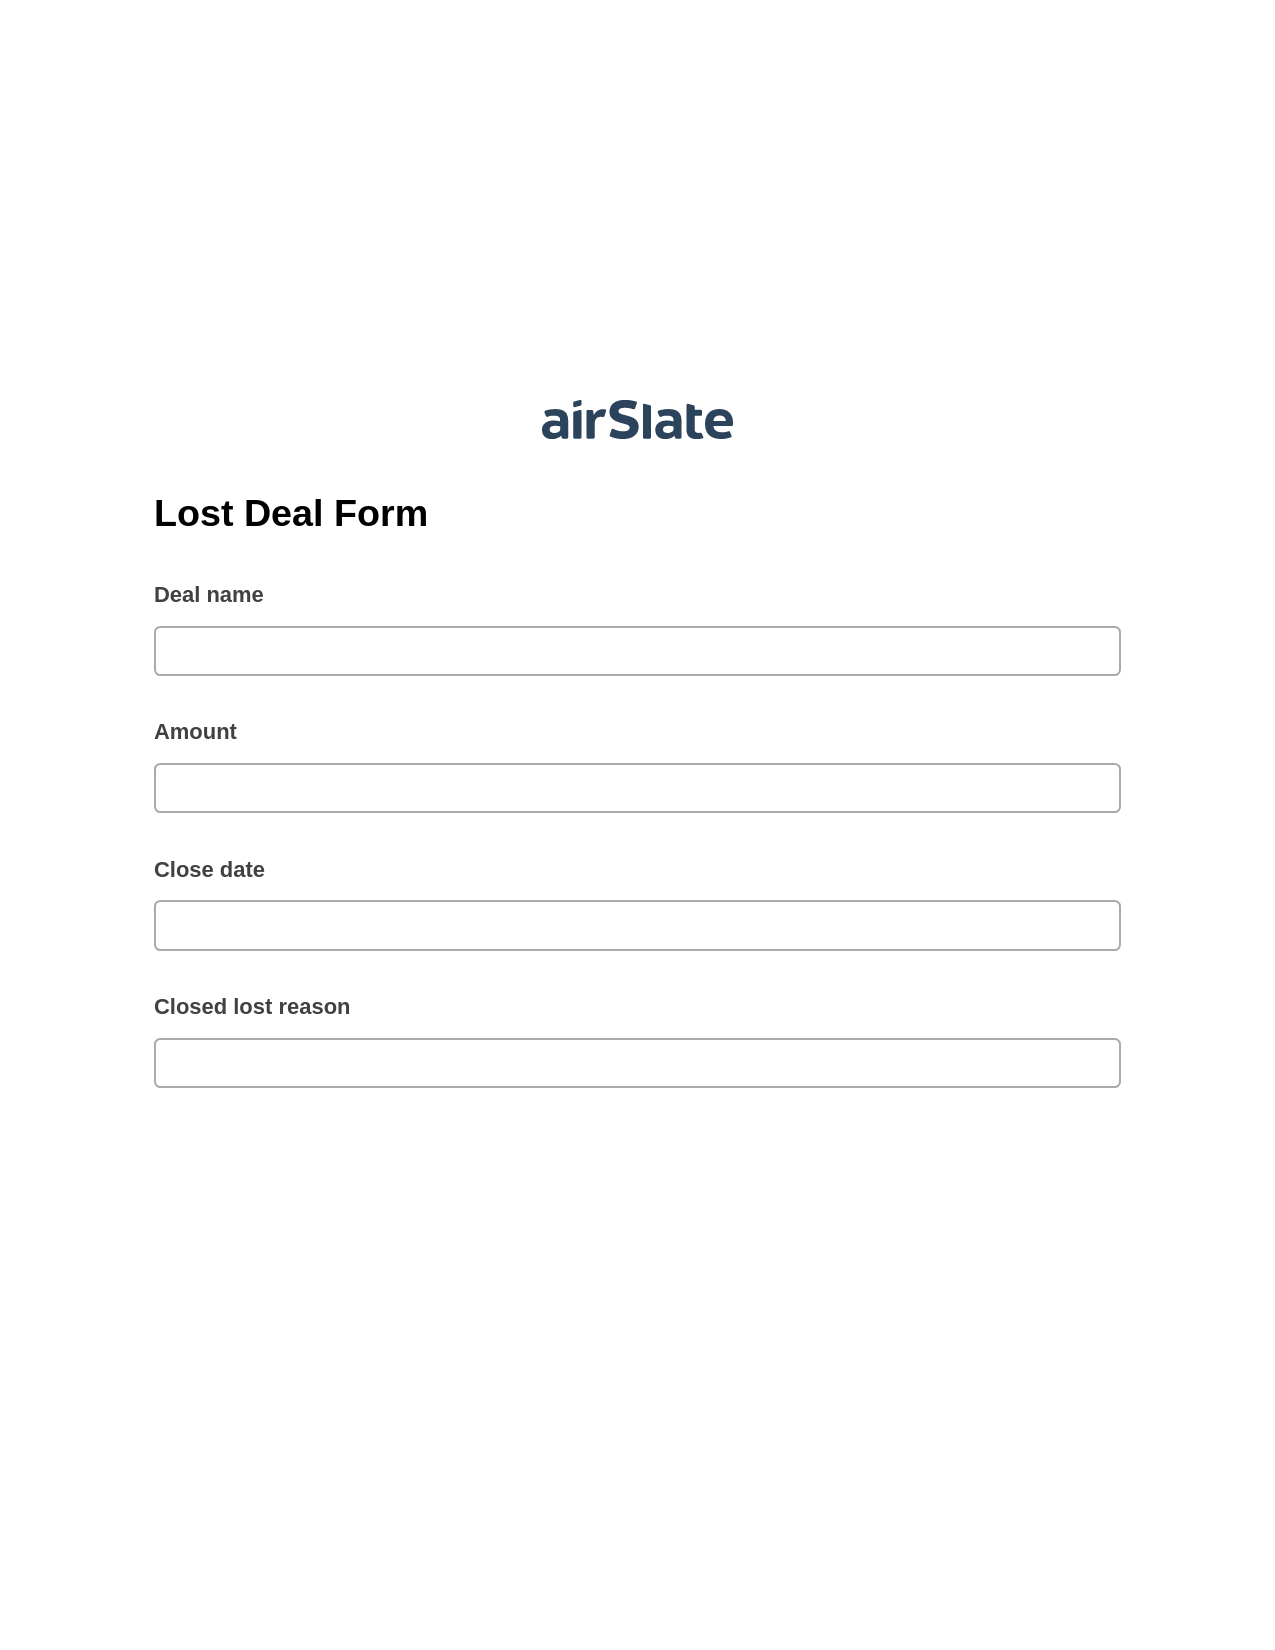 Lost Deal Form Pre-fill from CSV File Bot, Revoke Access Bot, Export to WebMerge Bot